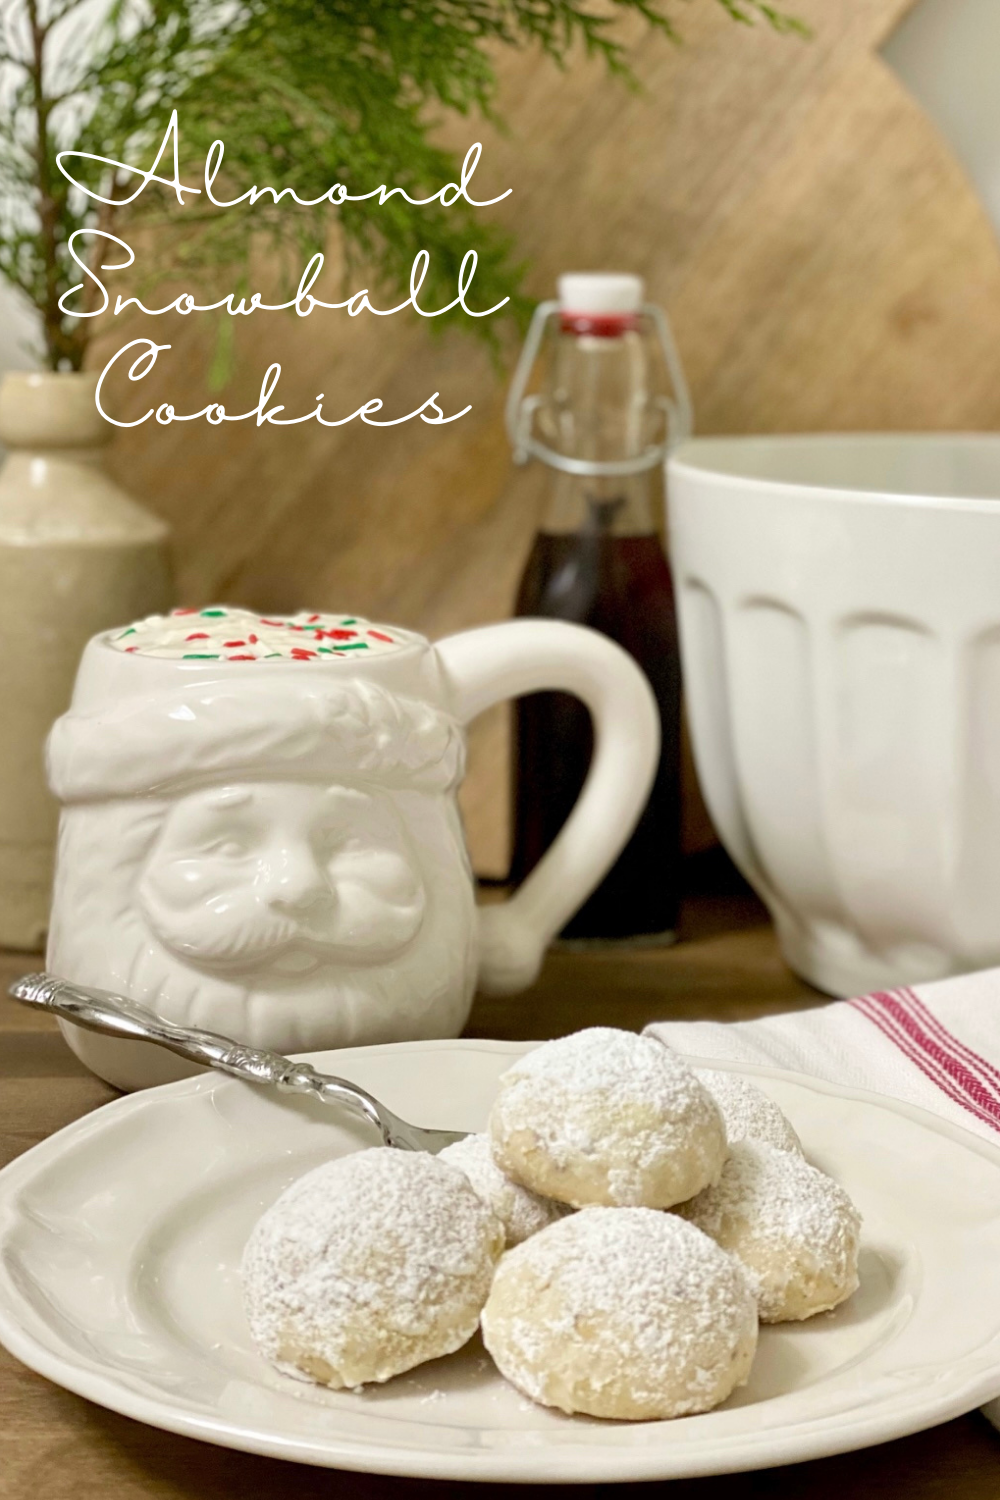 Plate of Almond Snowball Cookies with a Santa mug next to it.